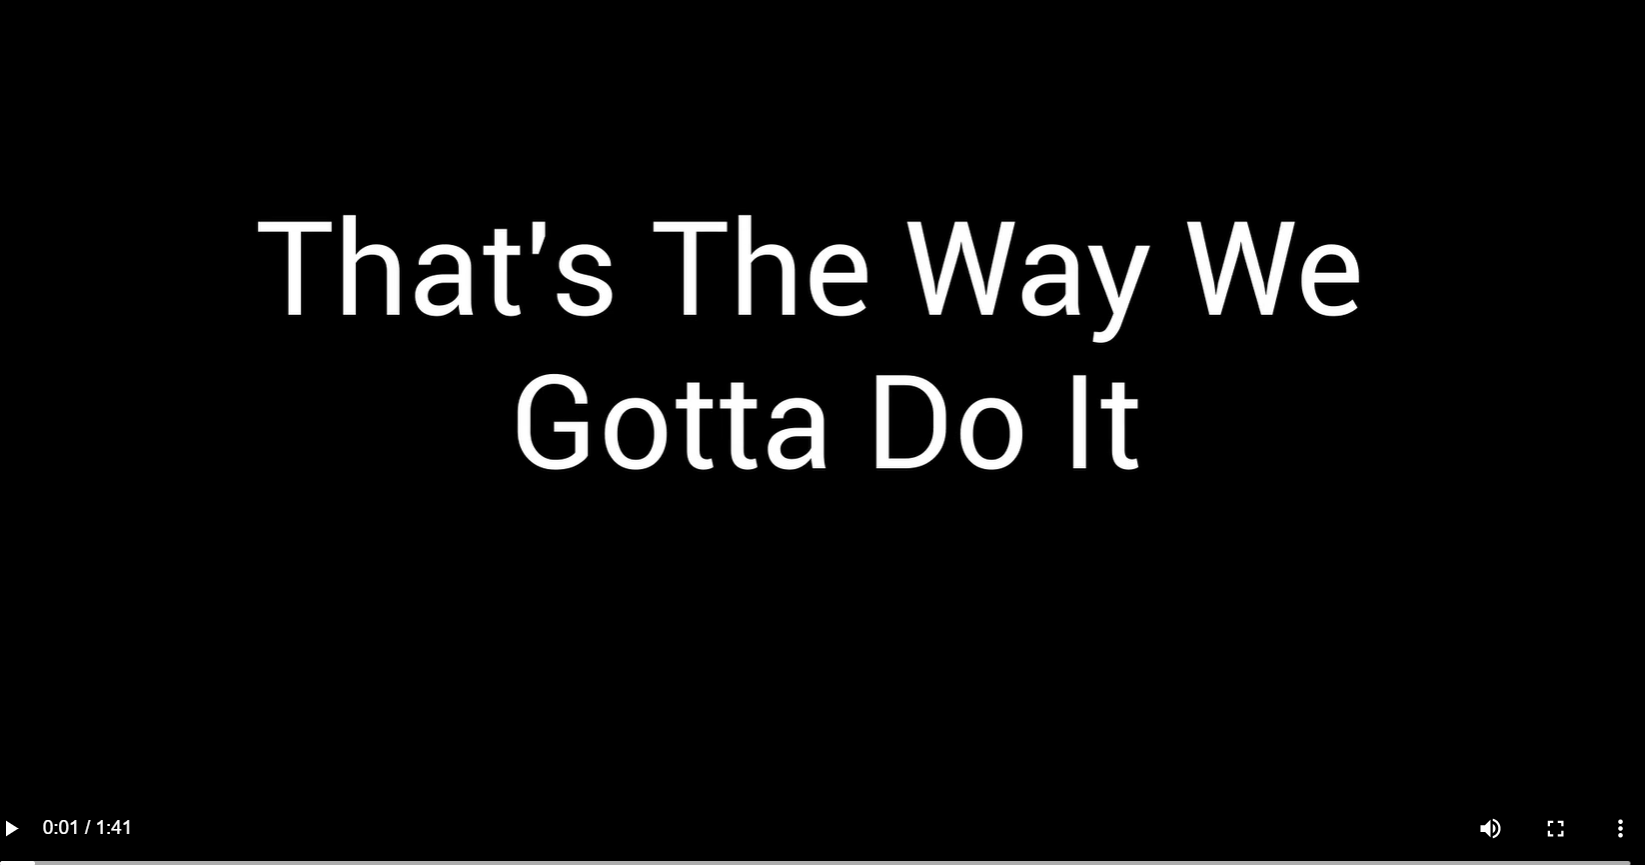 The words "That's the way we gotta do it" appear in white against a solid black background